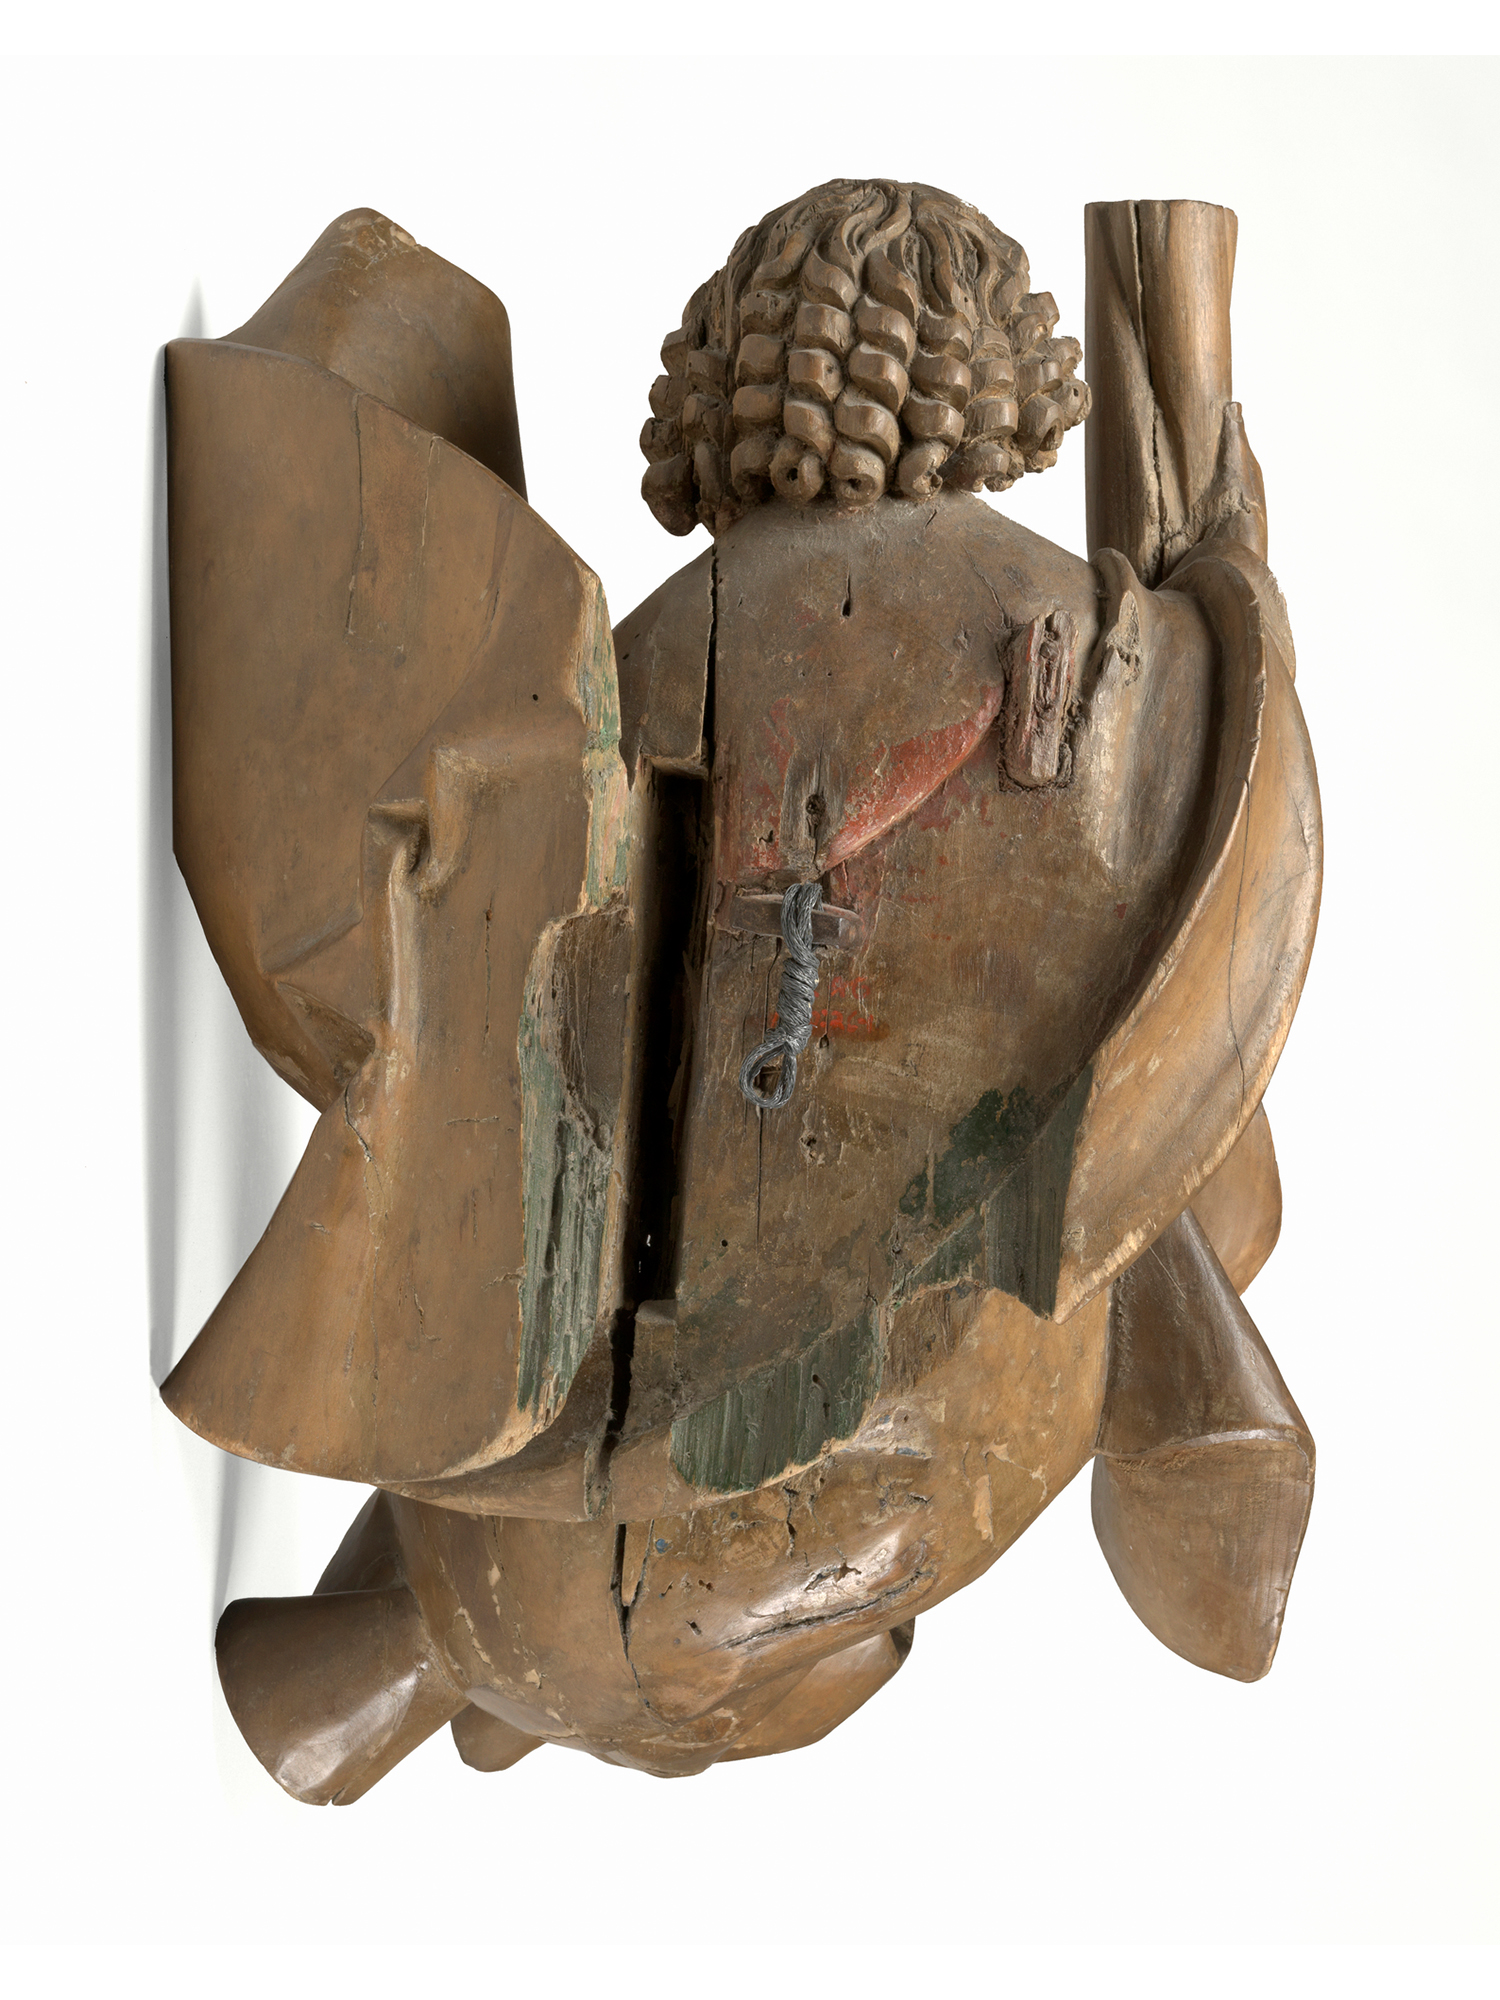 Back of the wooden sculpture of angel bearing a column